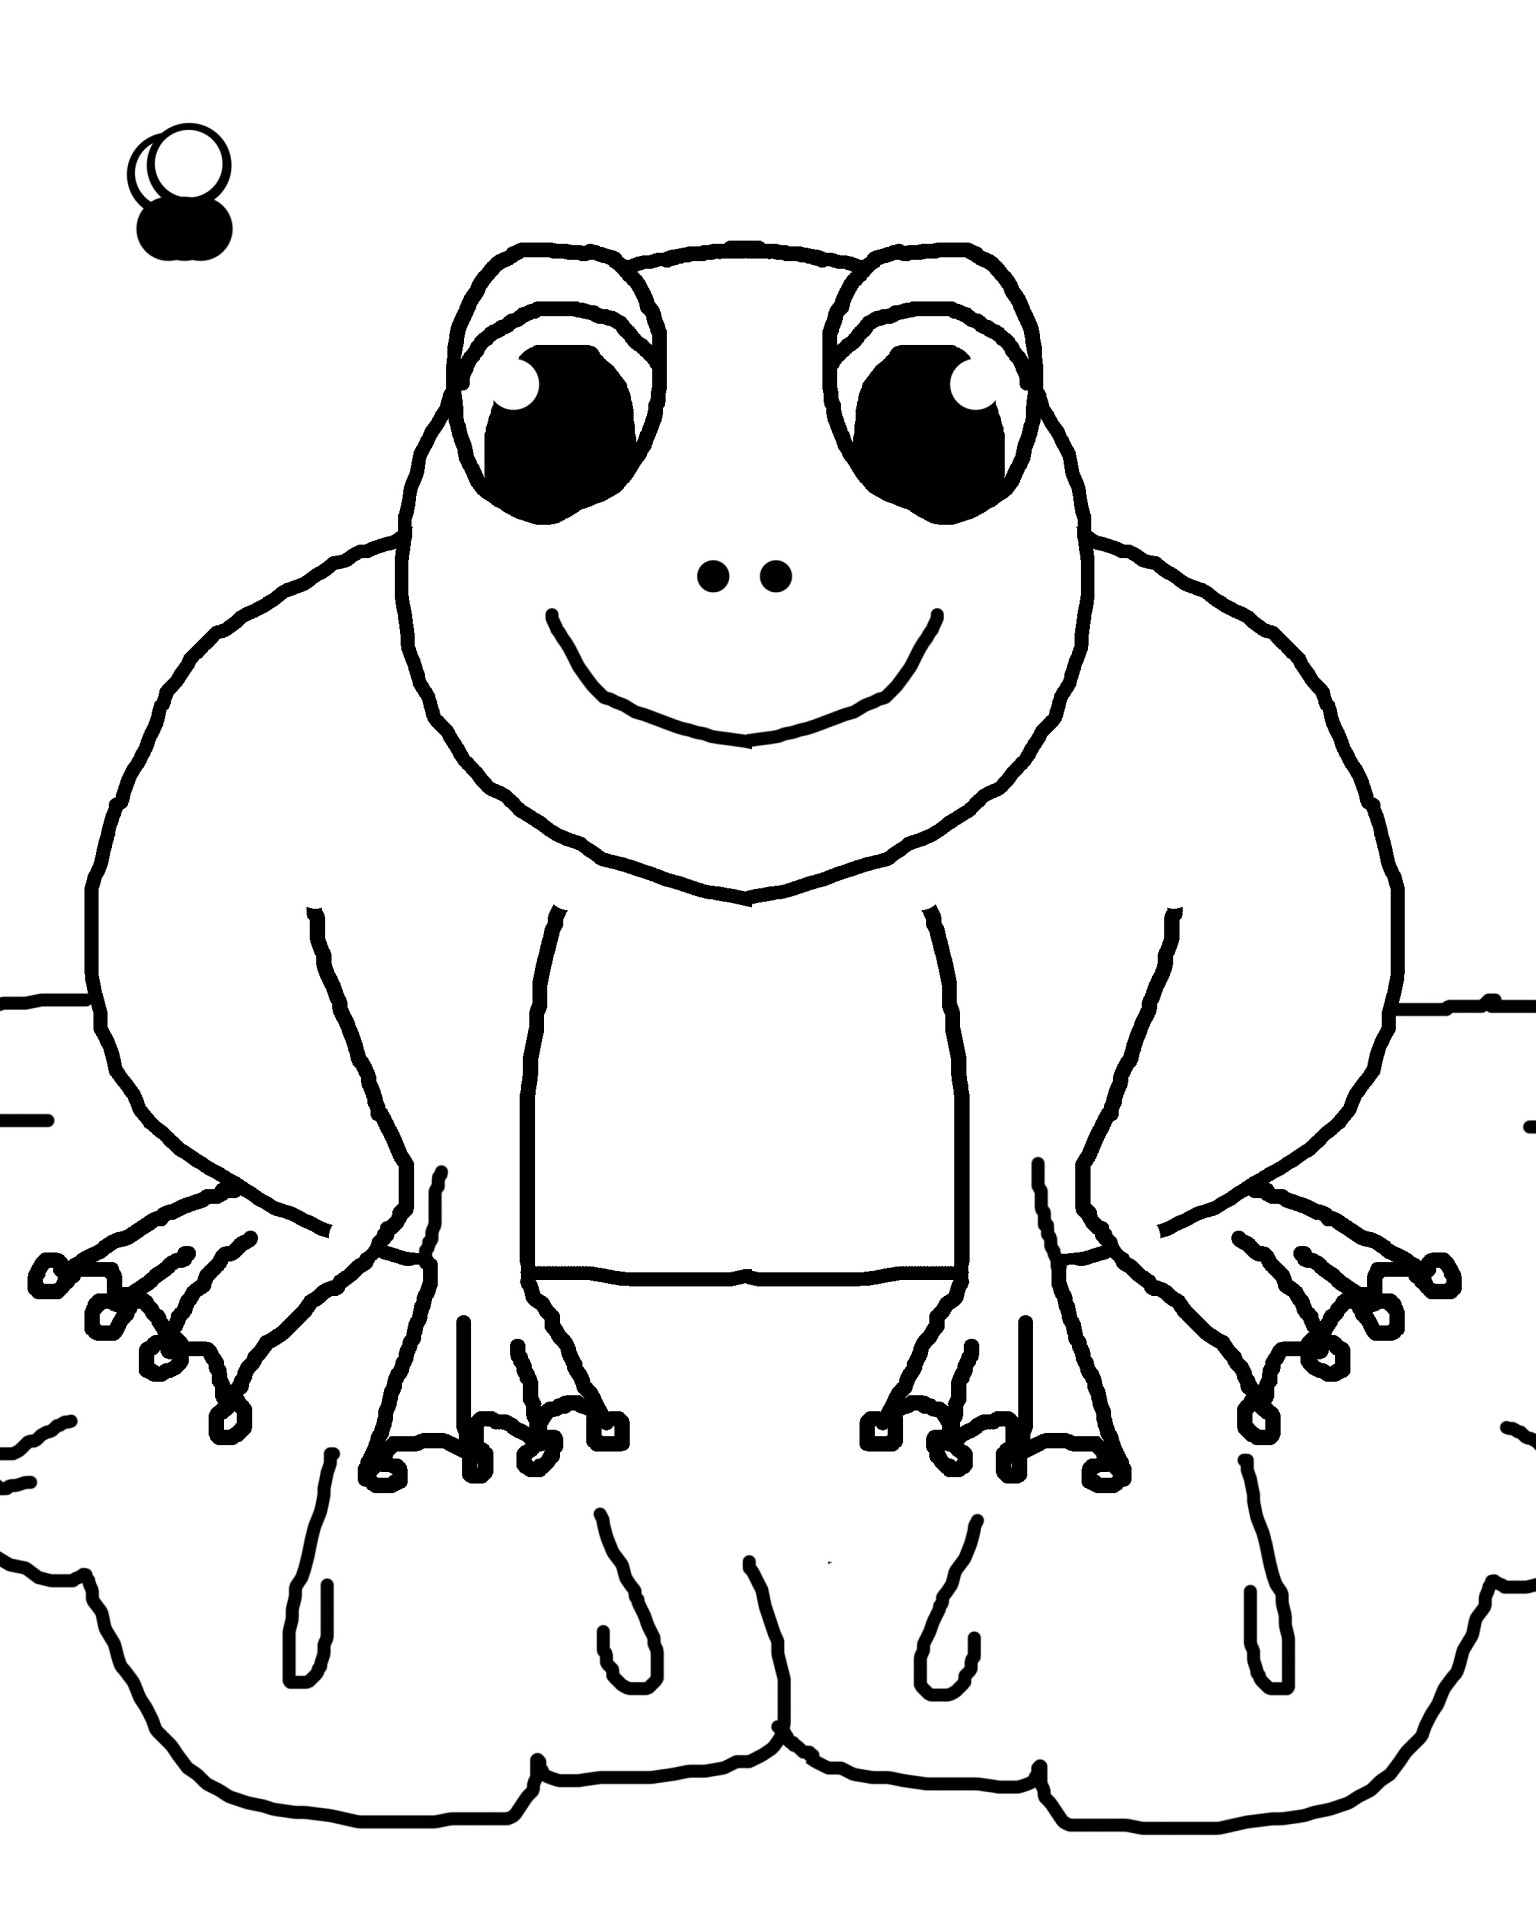 frog outline coloring free photo